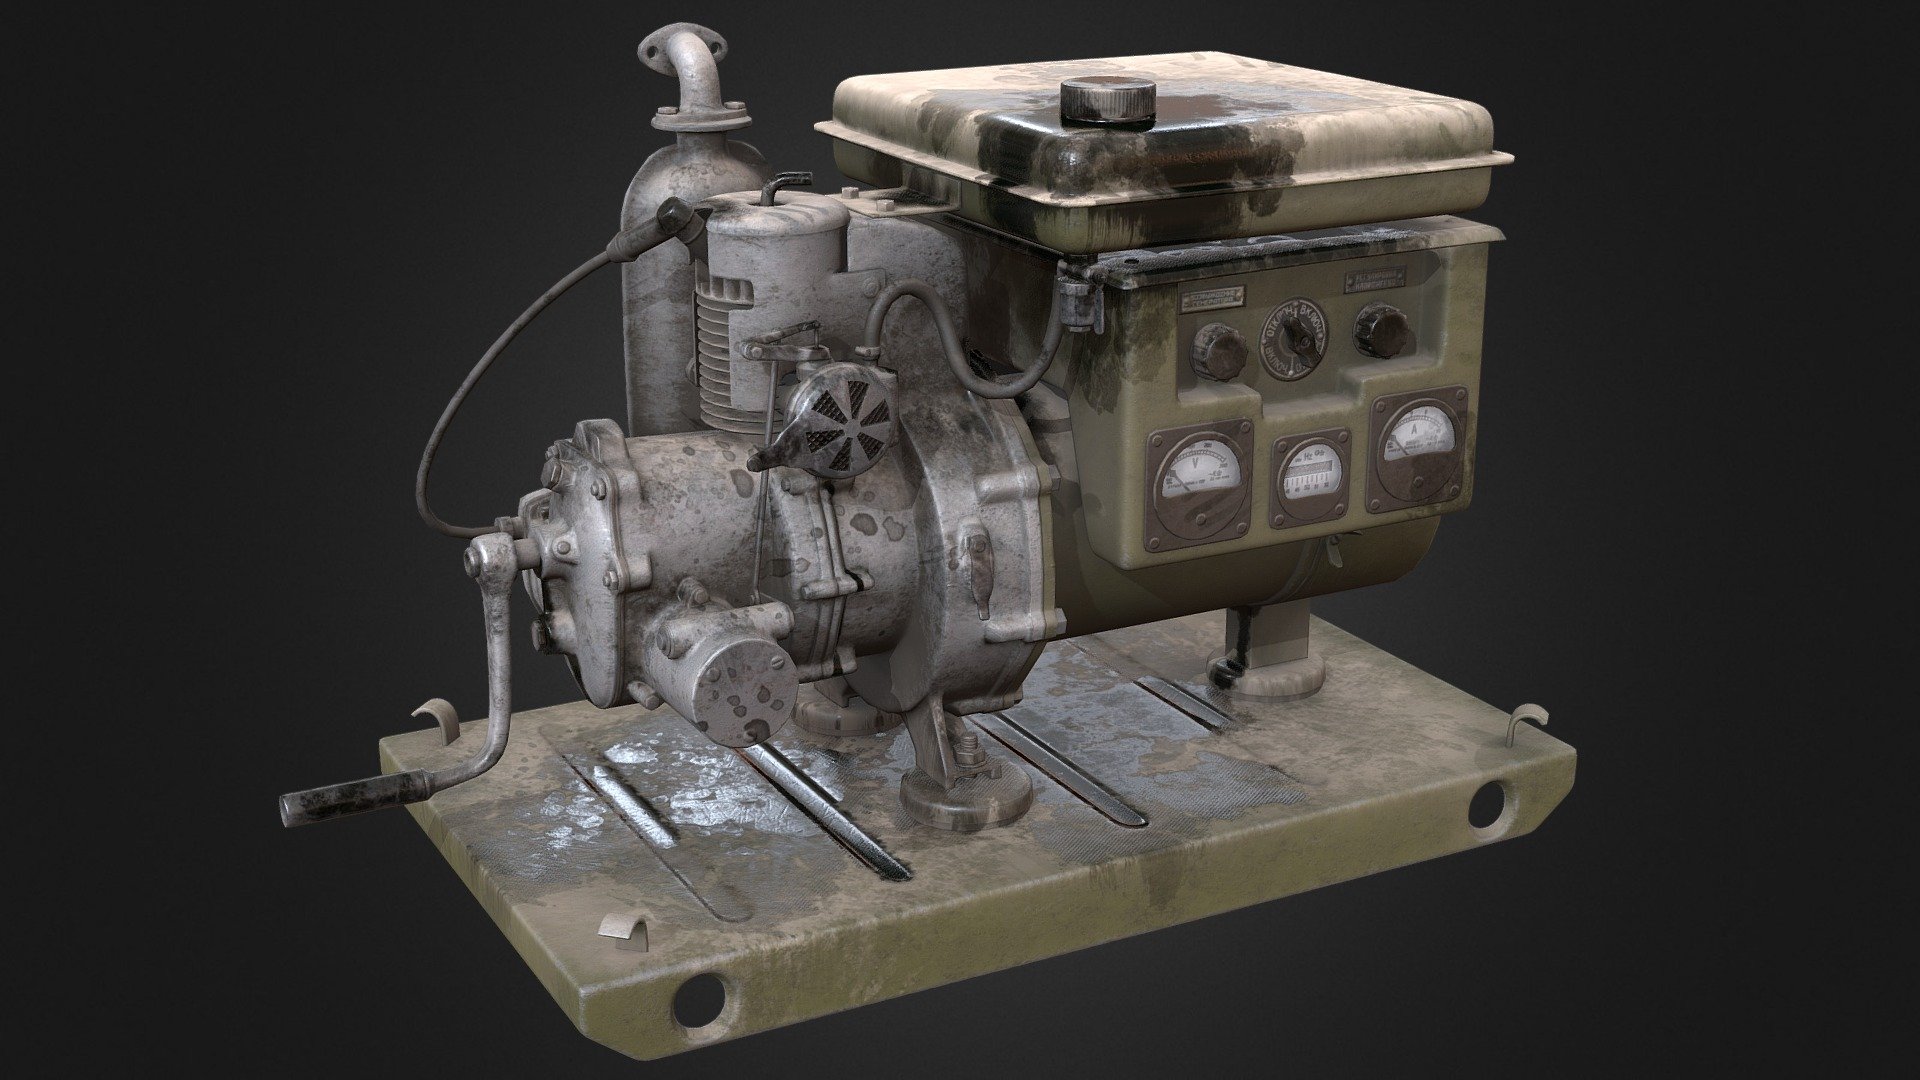 My father had one, like this. Modeled in Blender, baked with Marmoset, textured in Substance 3d model